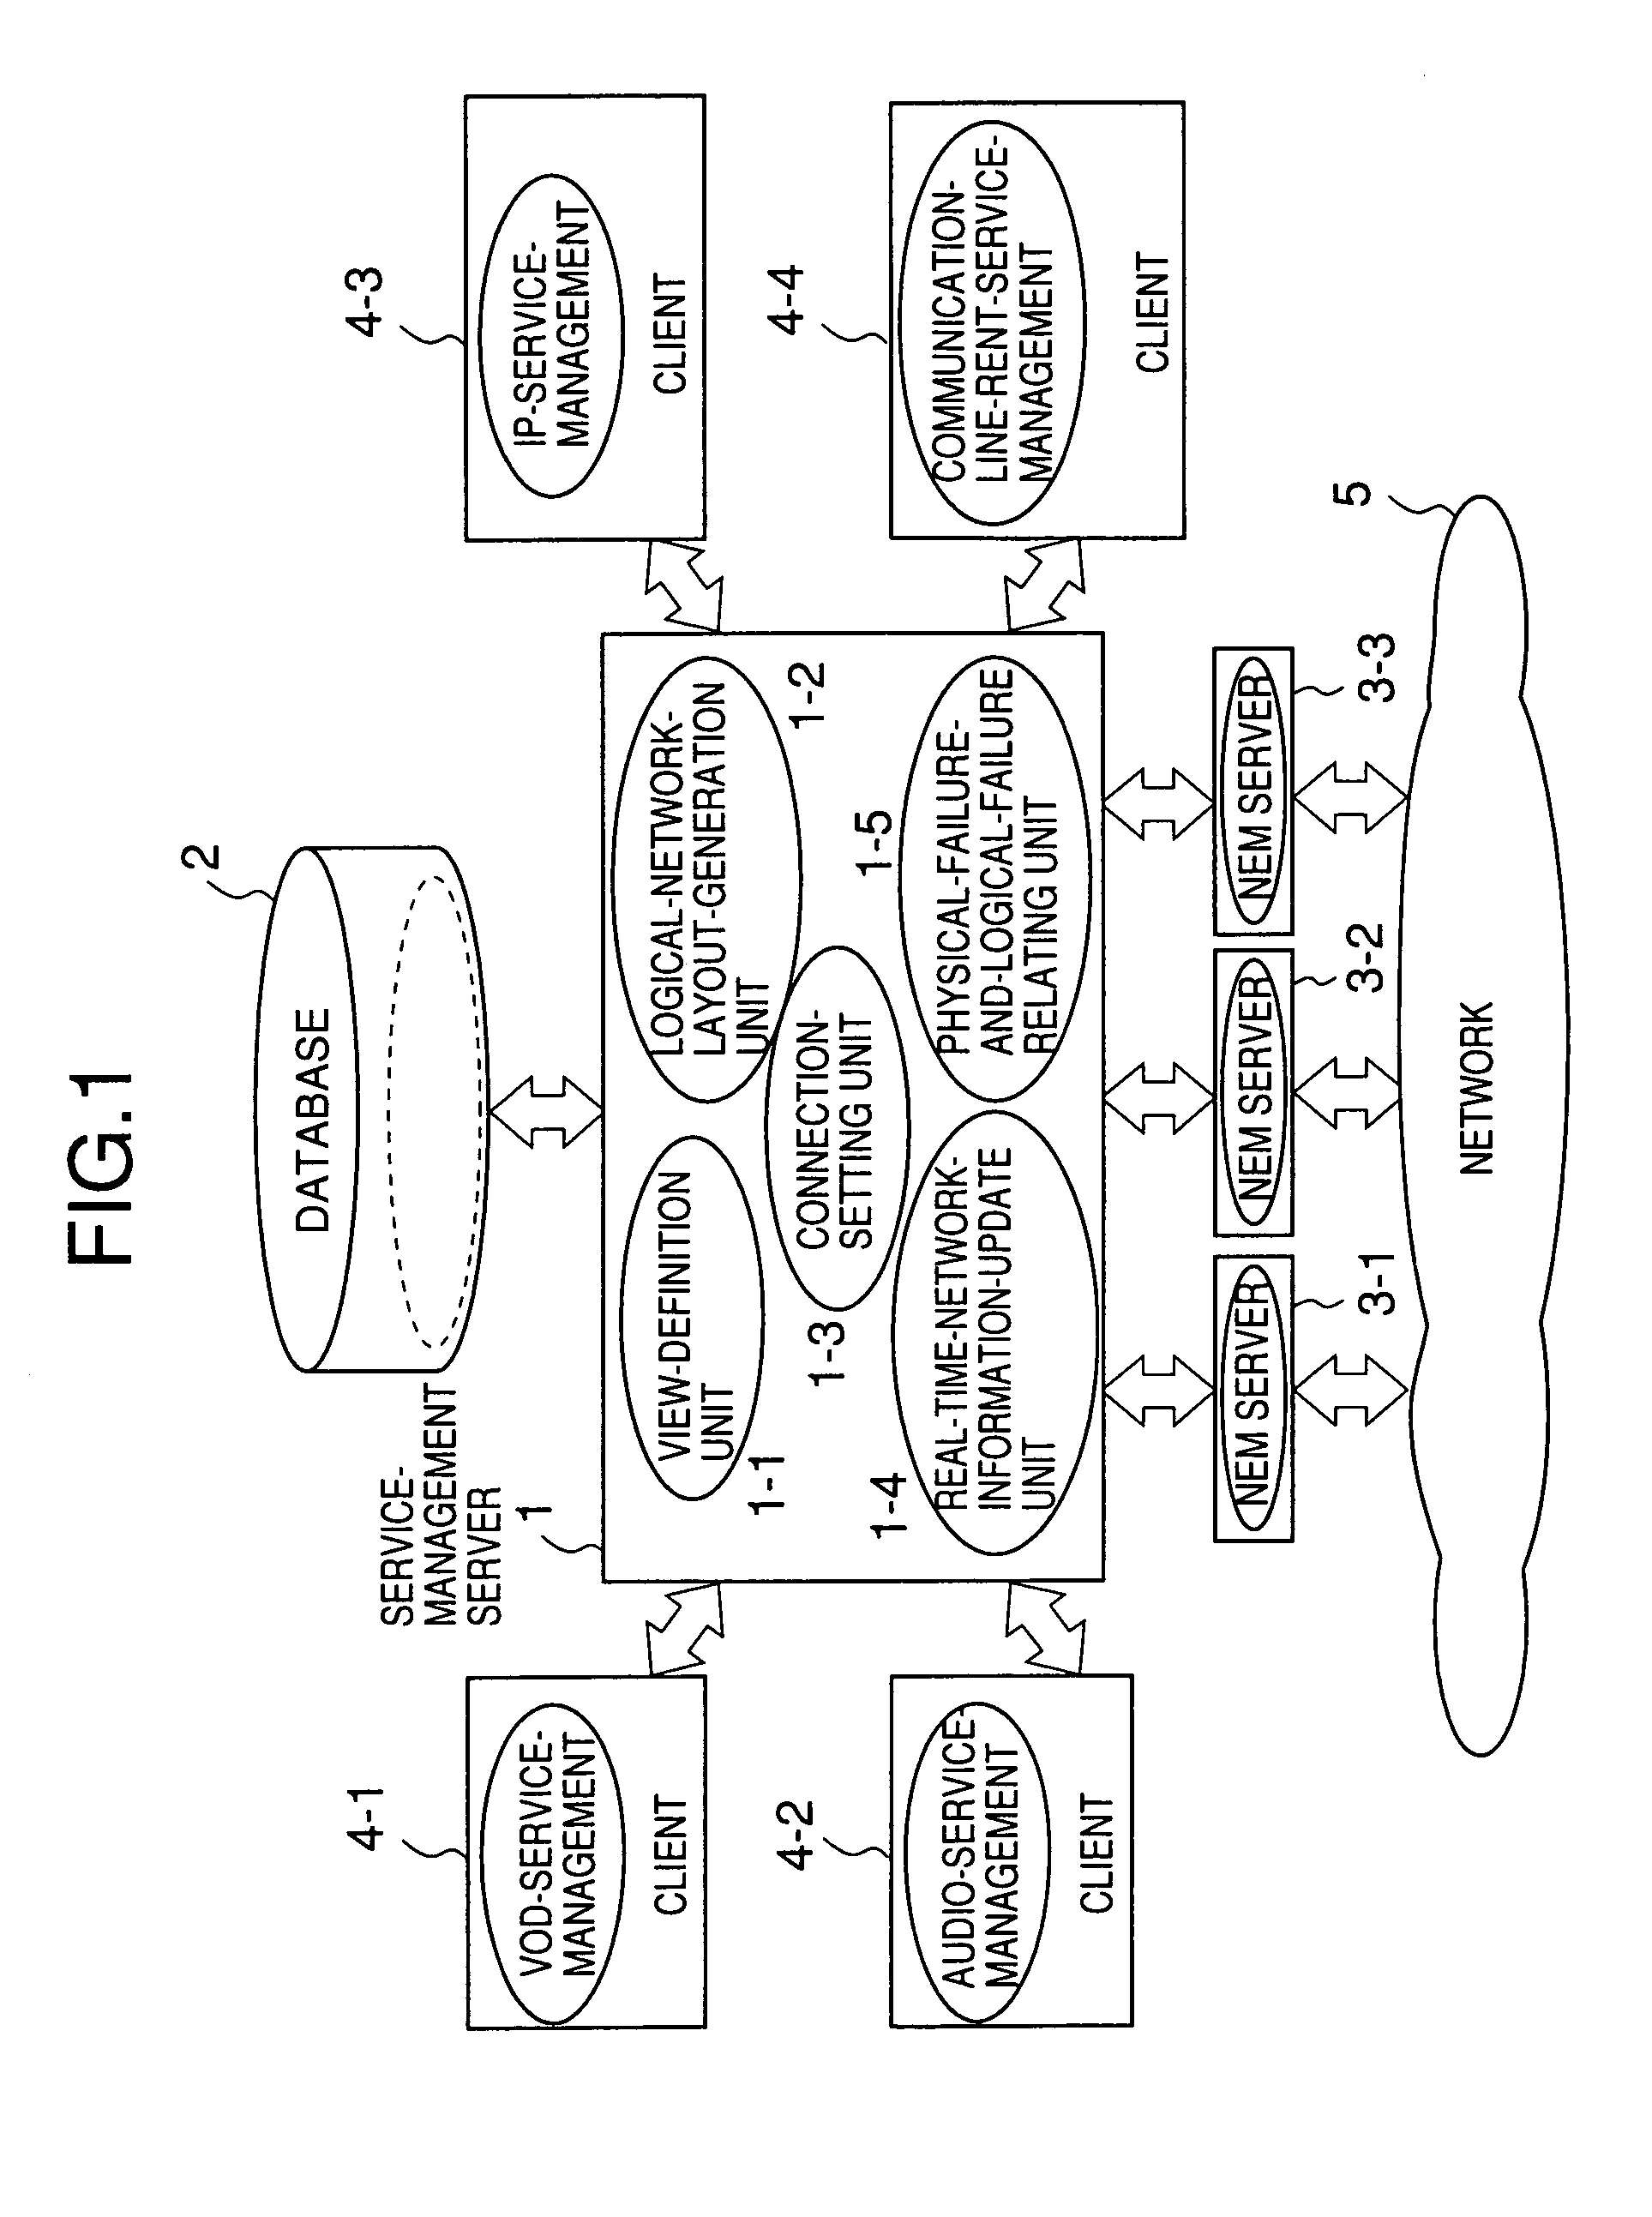 Method and system for network management